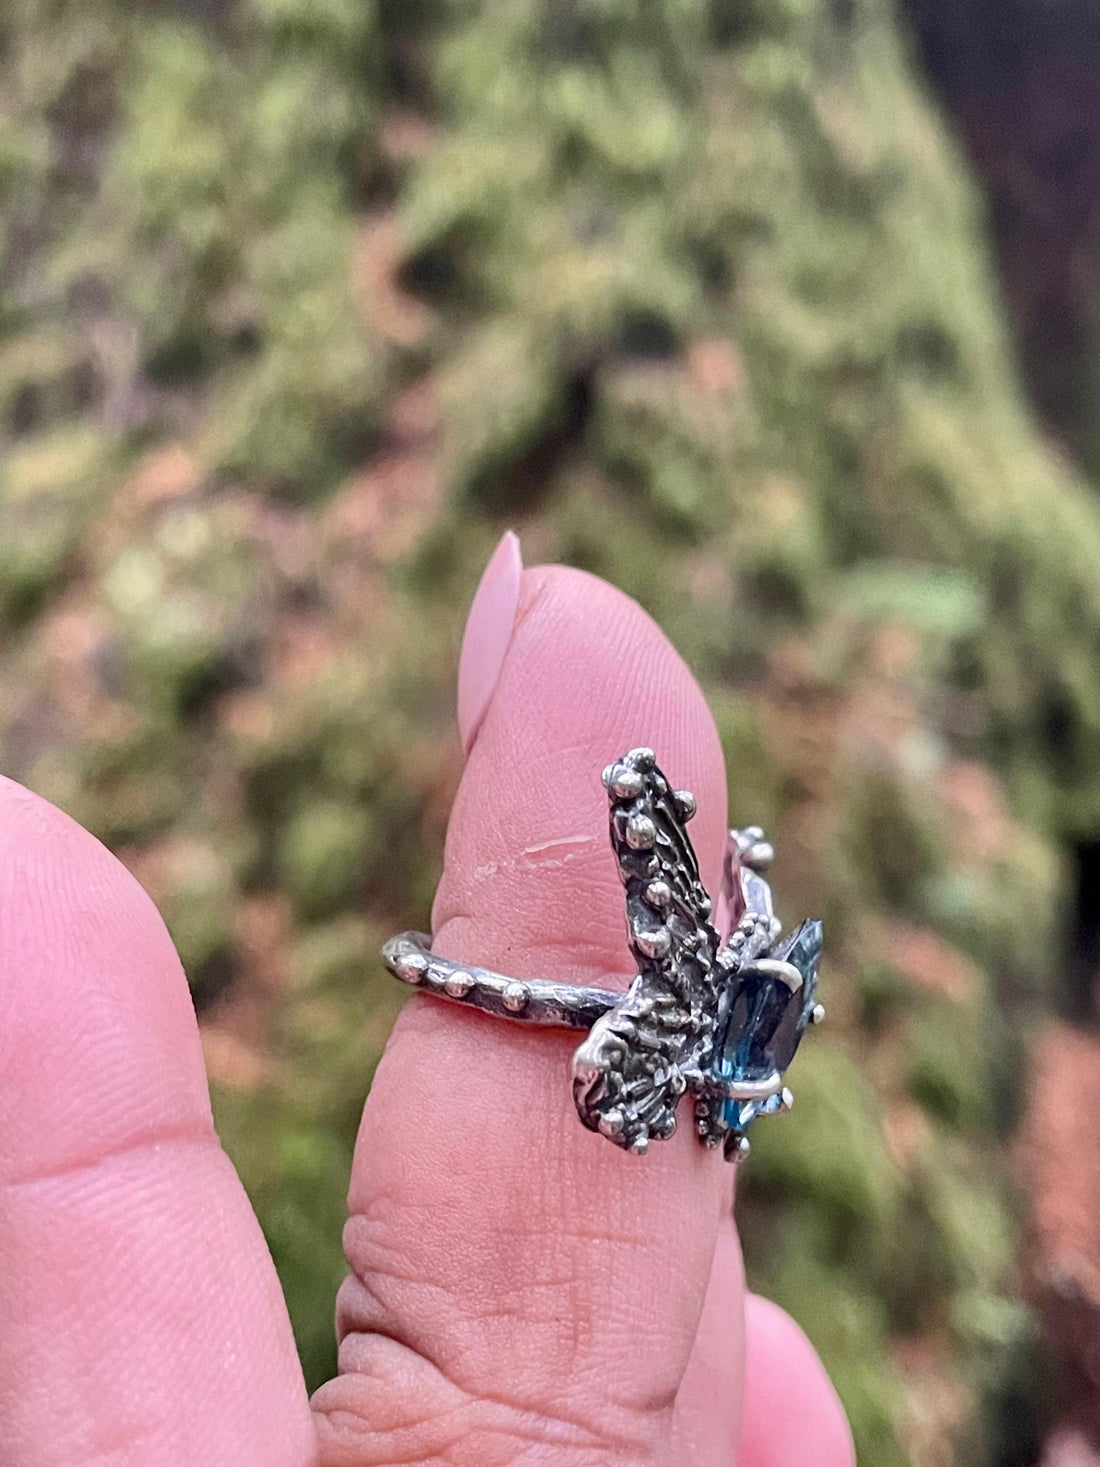 LA London Blue Topaz Butterfly Sterling Silver Ring - US Size 6 - Sand and Snow Jewelry - Rings - PNW Collection